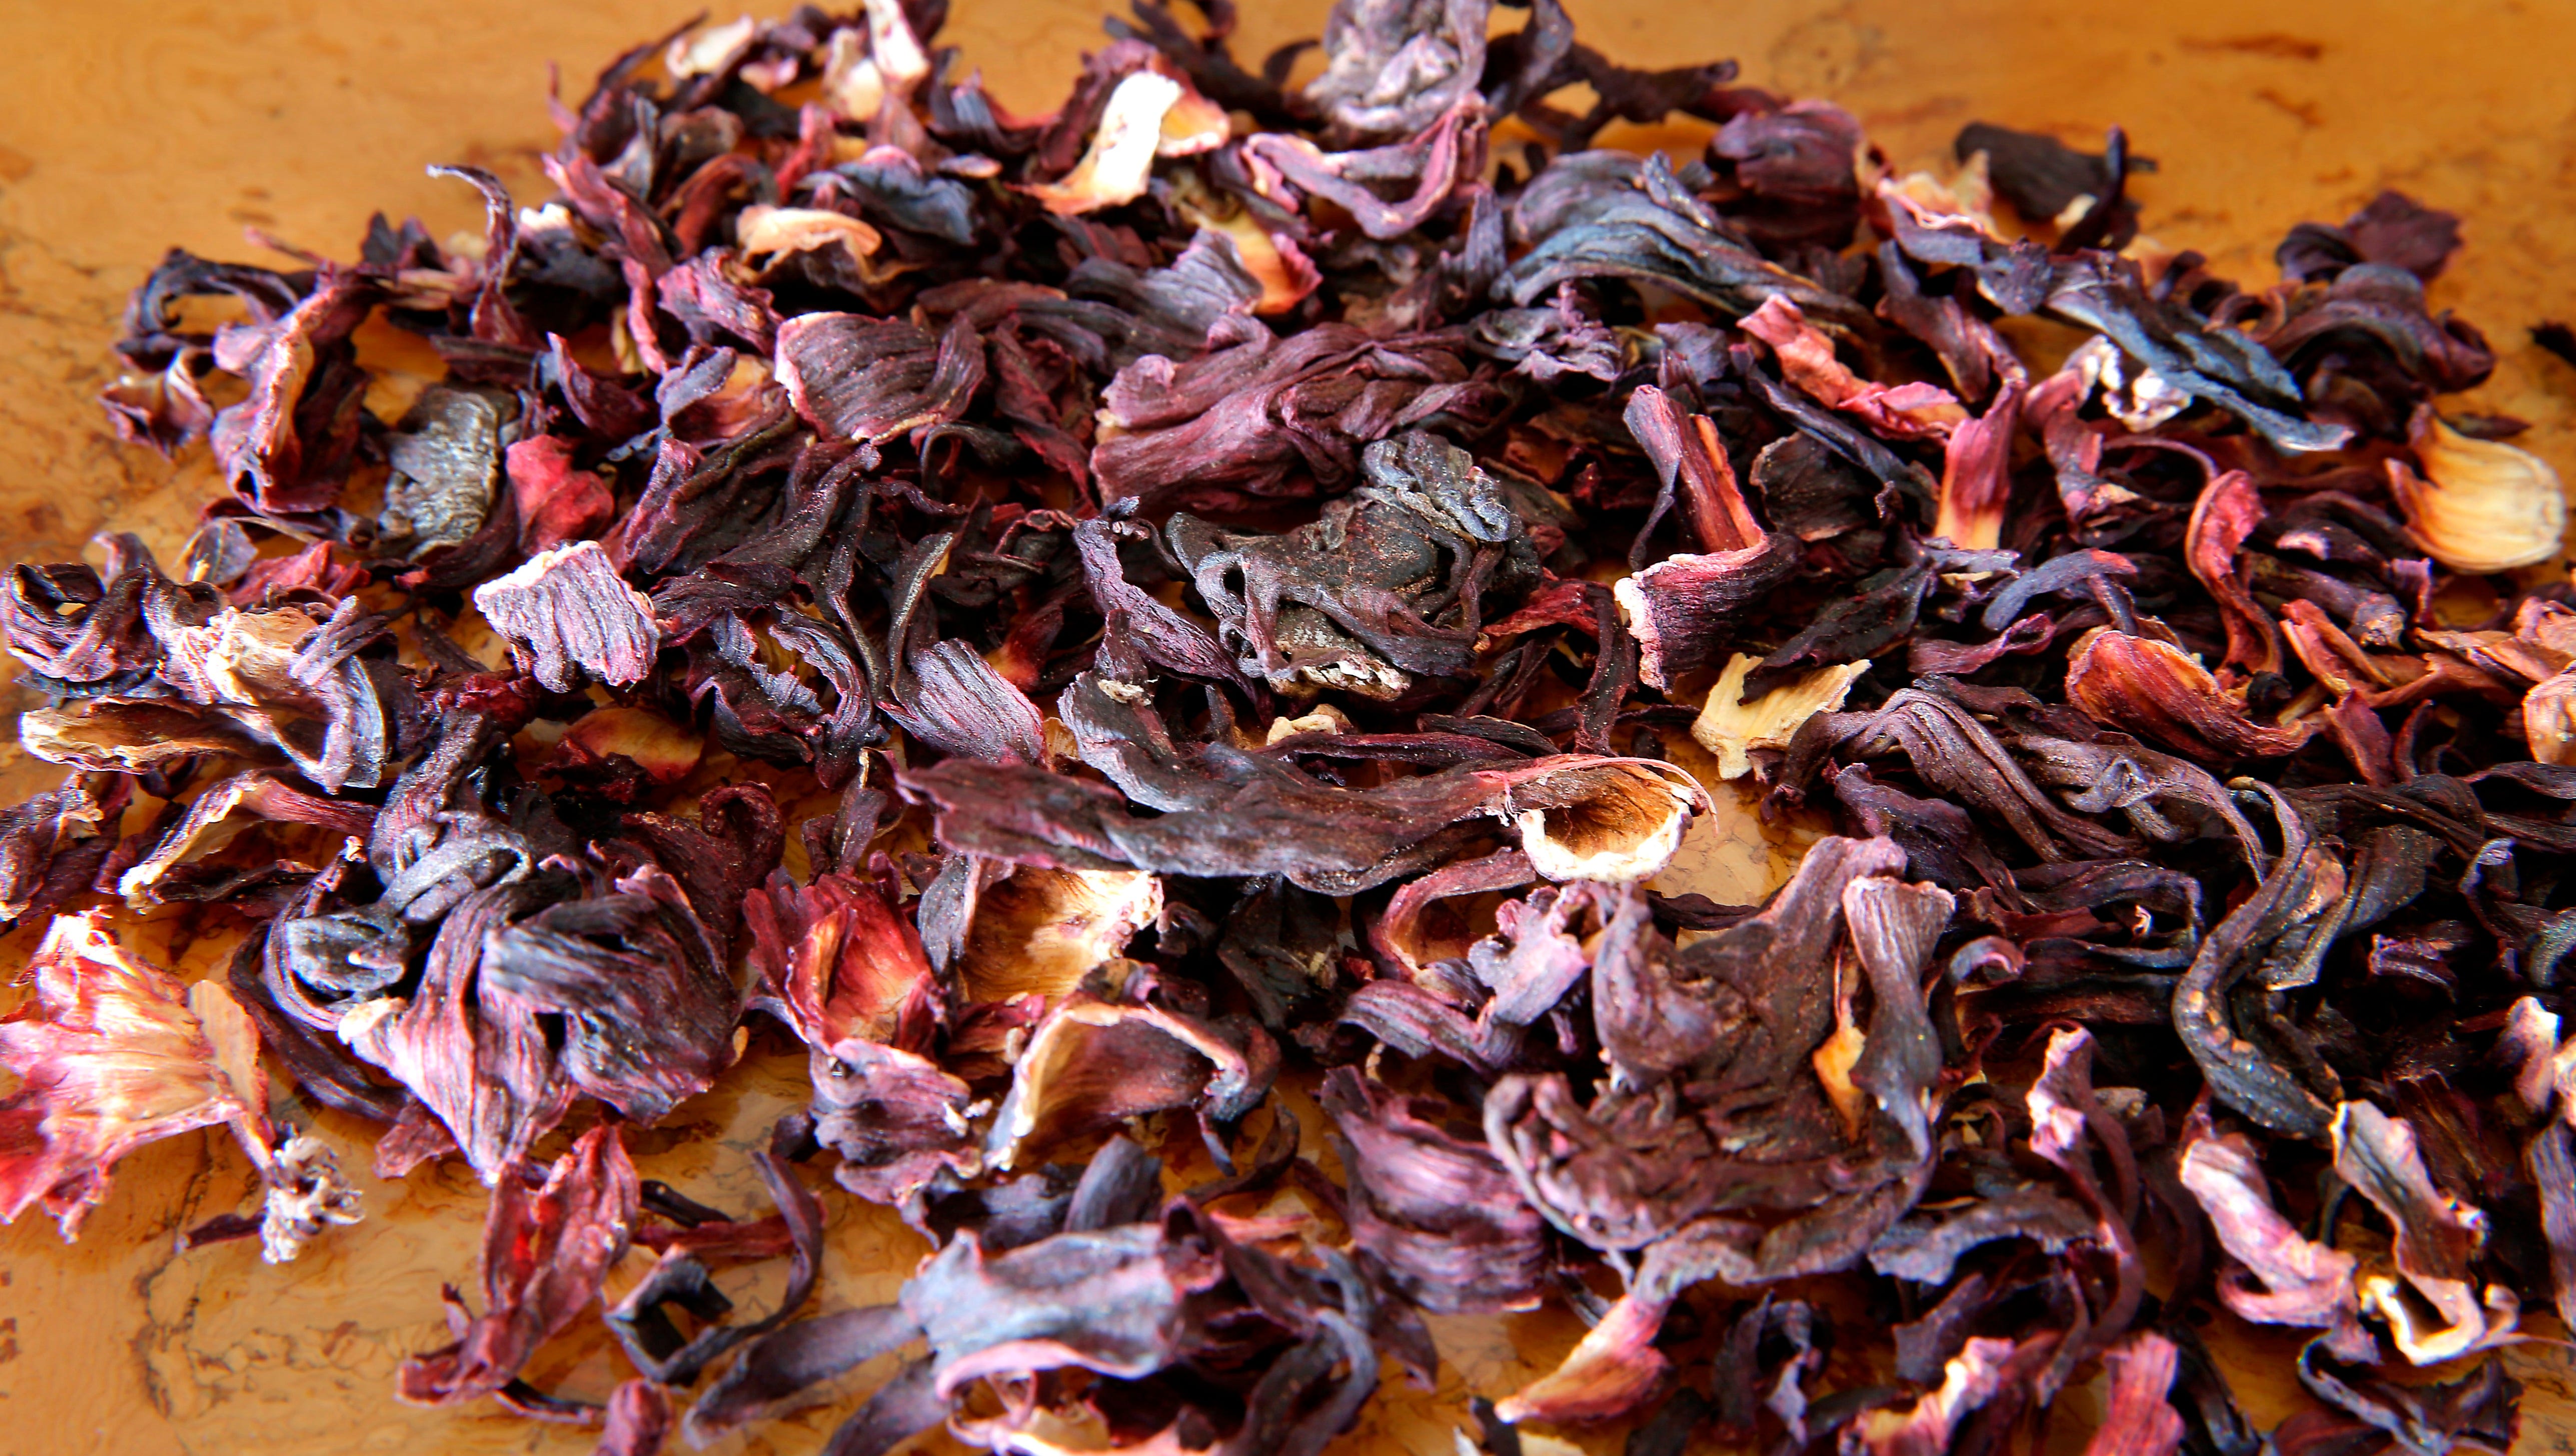 Hibiscus is the flower that's good enough to drink (and eat)